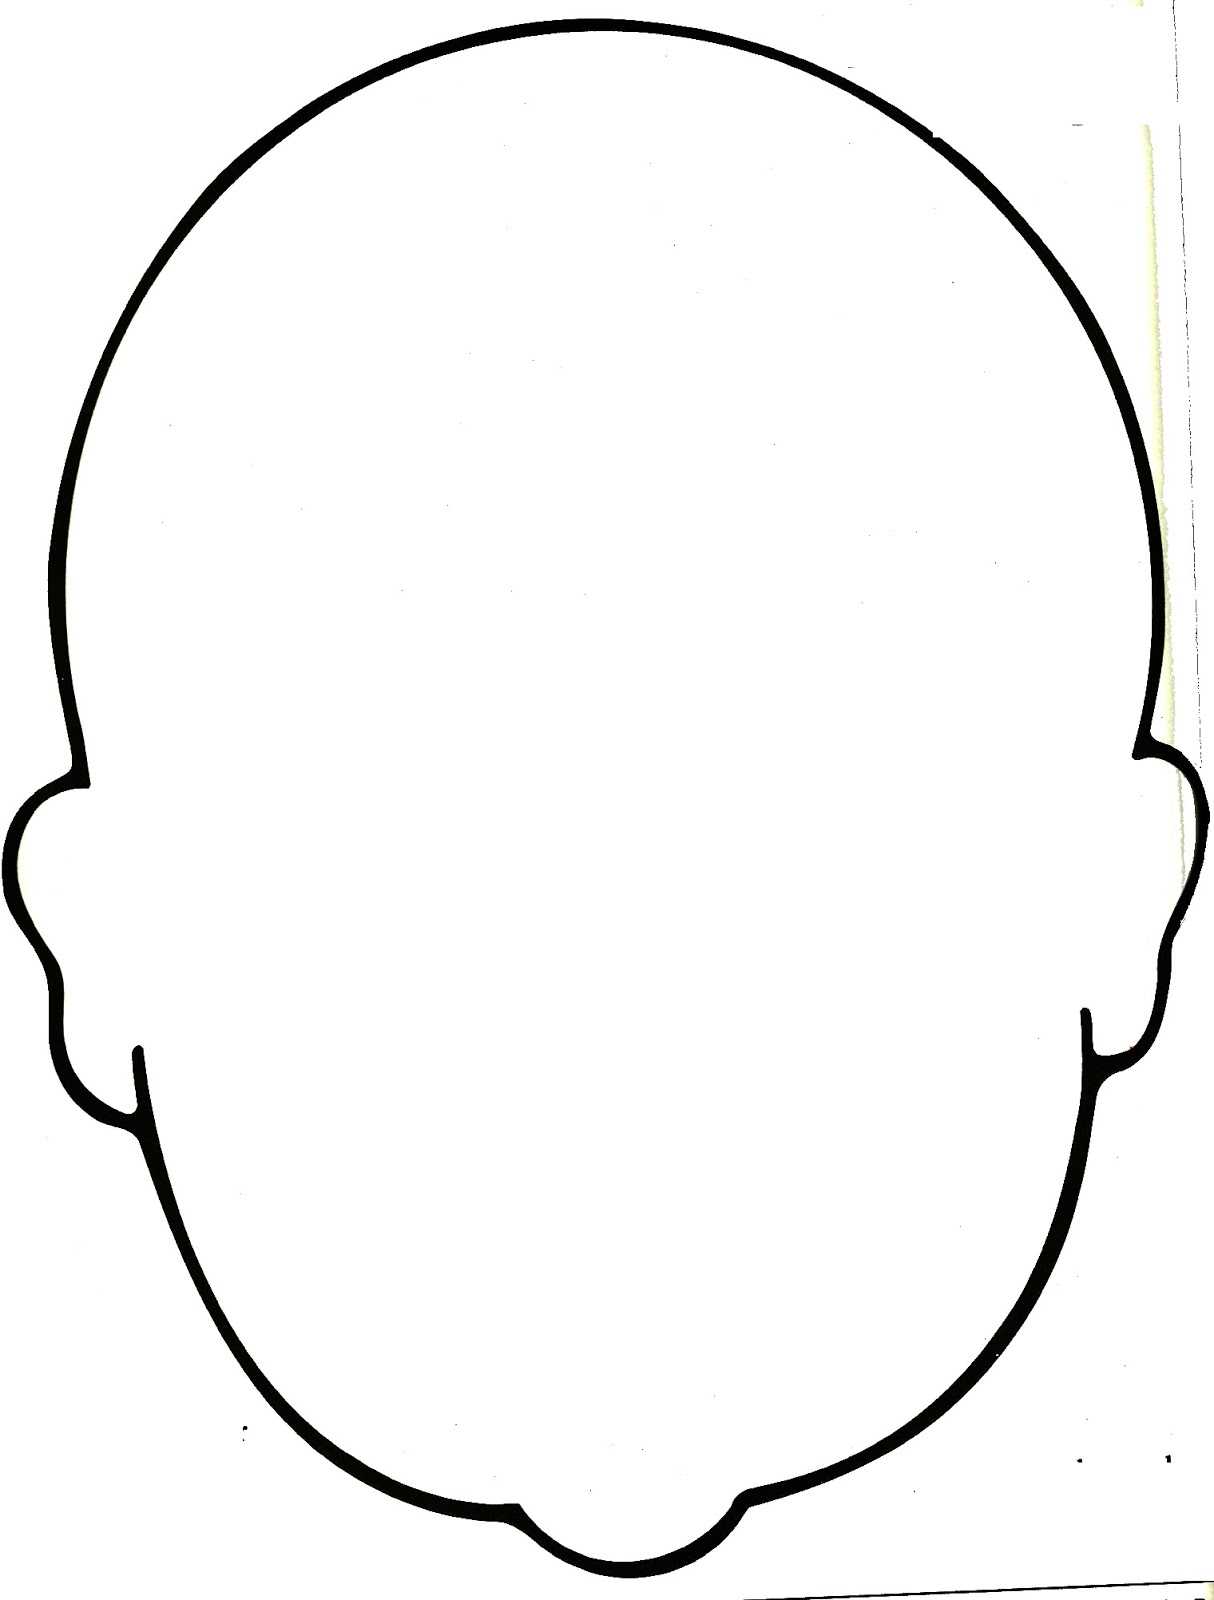 Free Blank Face Template, Download Free Clip Art, Free Clip For Blank Face Template Preschool